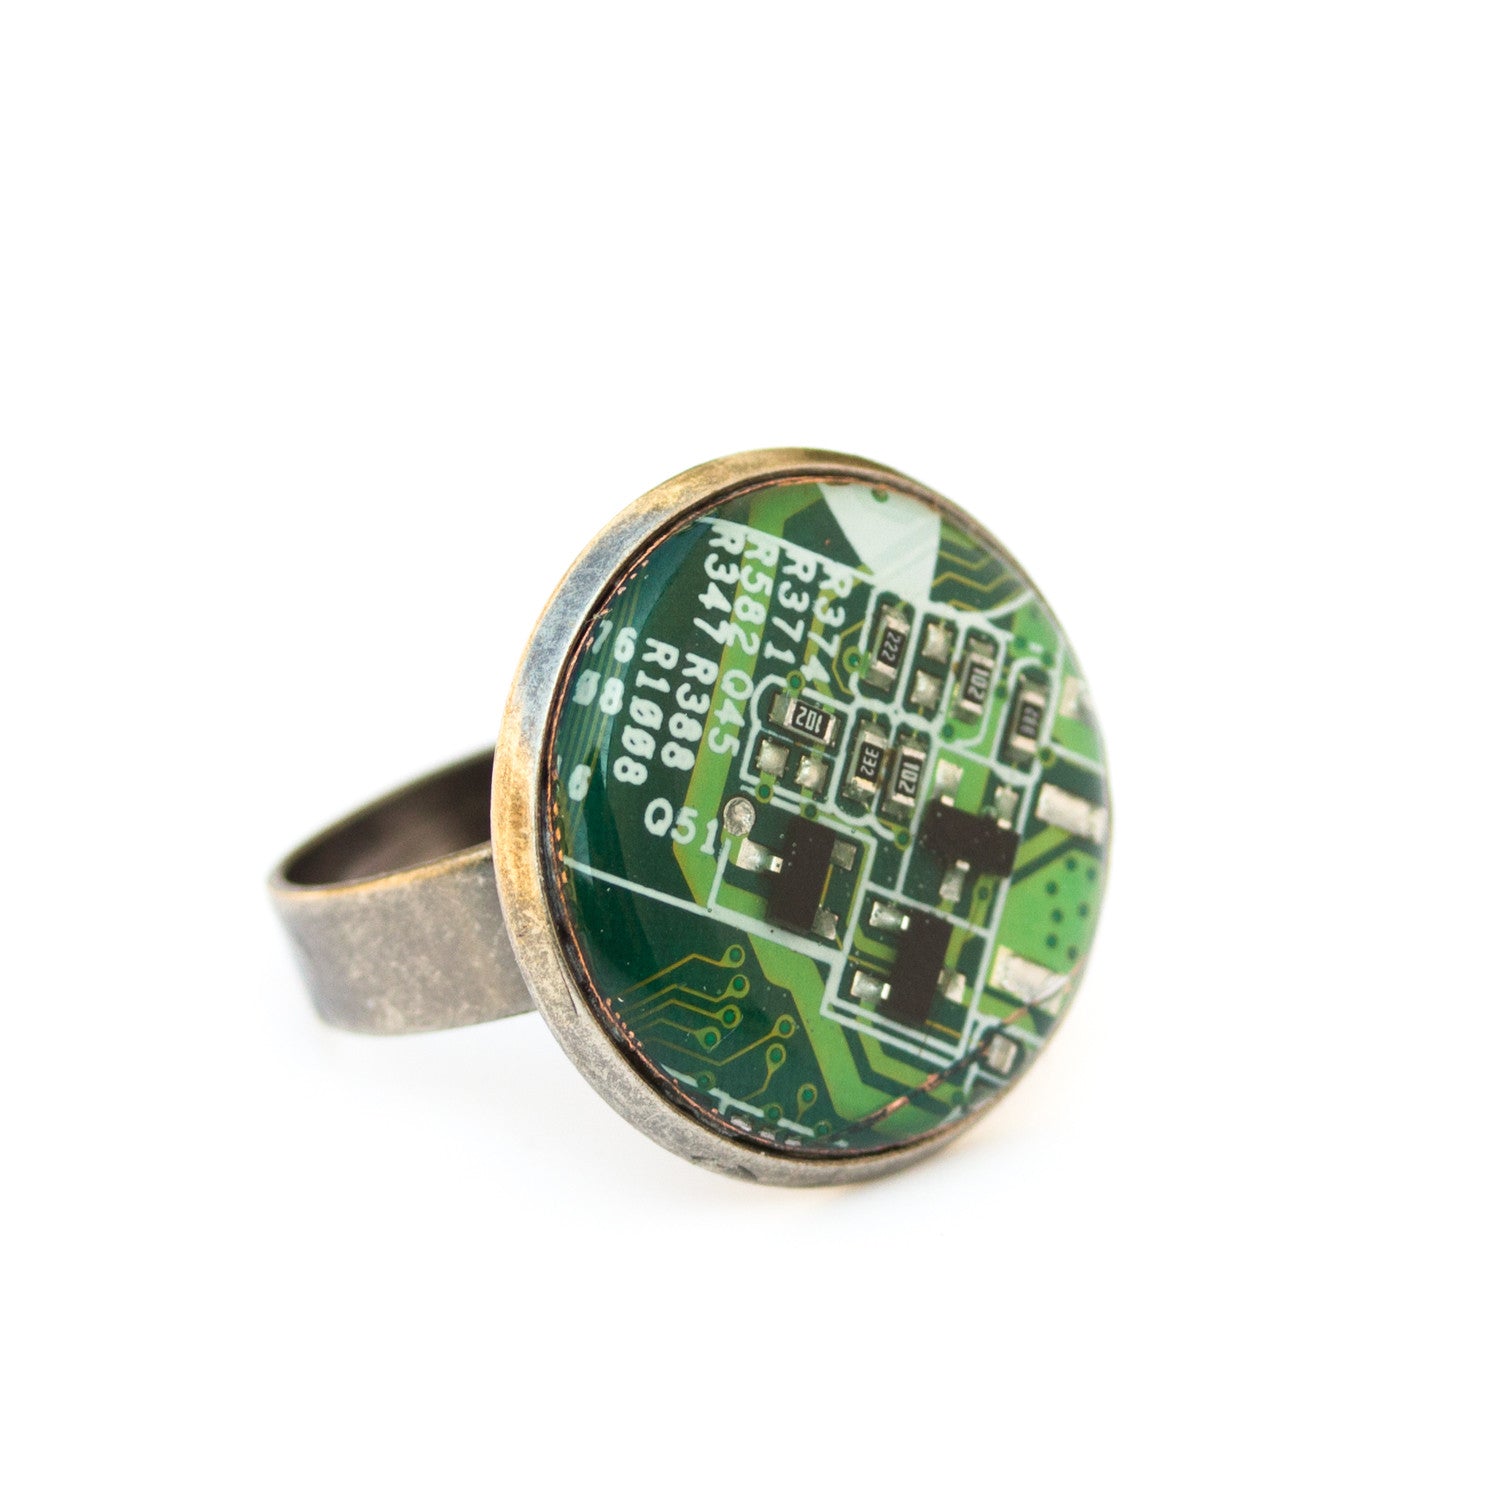 Geeky circuit board round ring - 18 mm